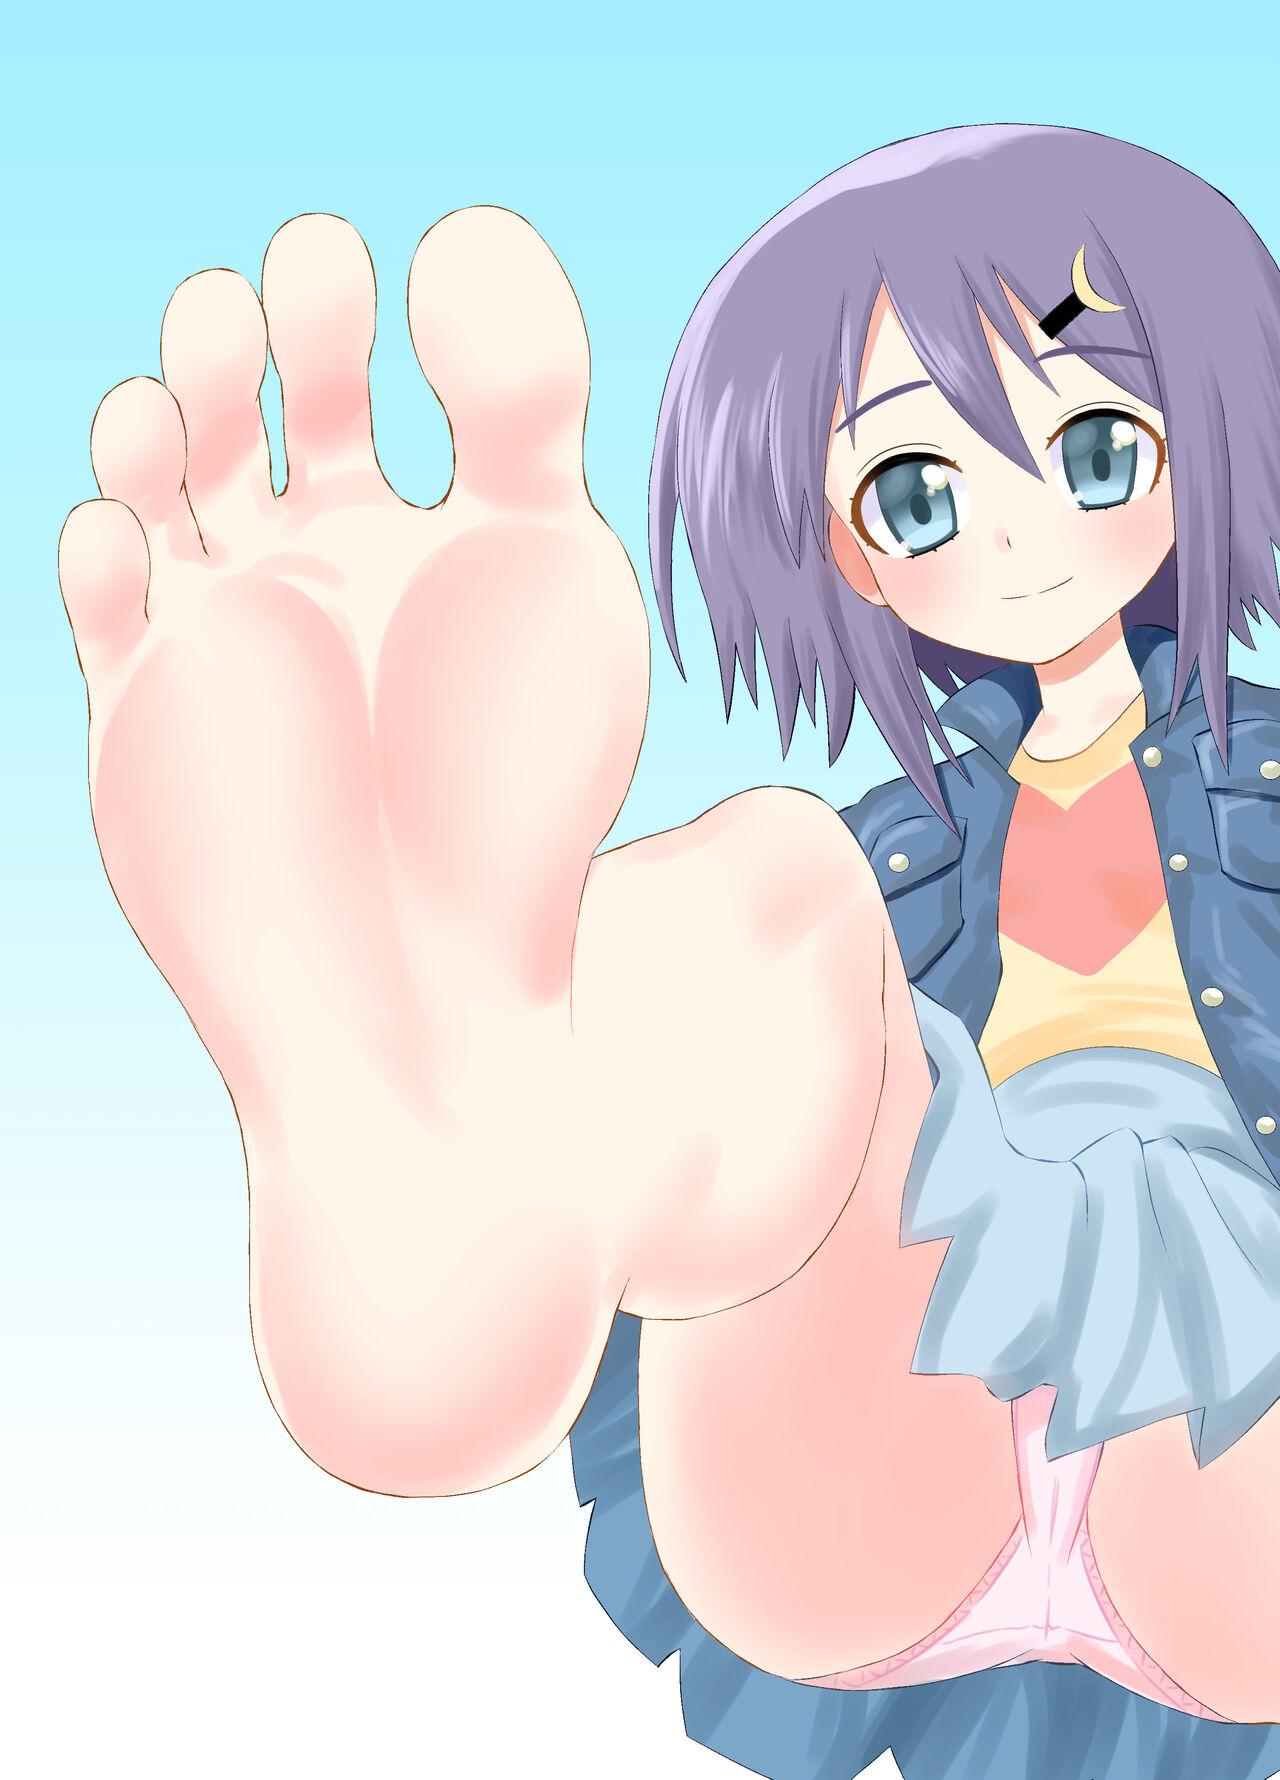 A CG collection of getting smaller and being stepped on by a girl 60